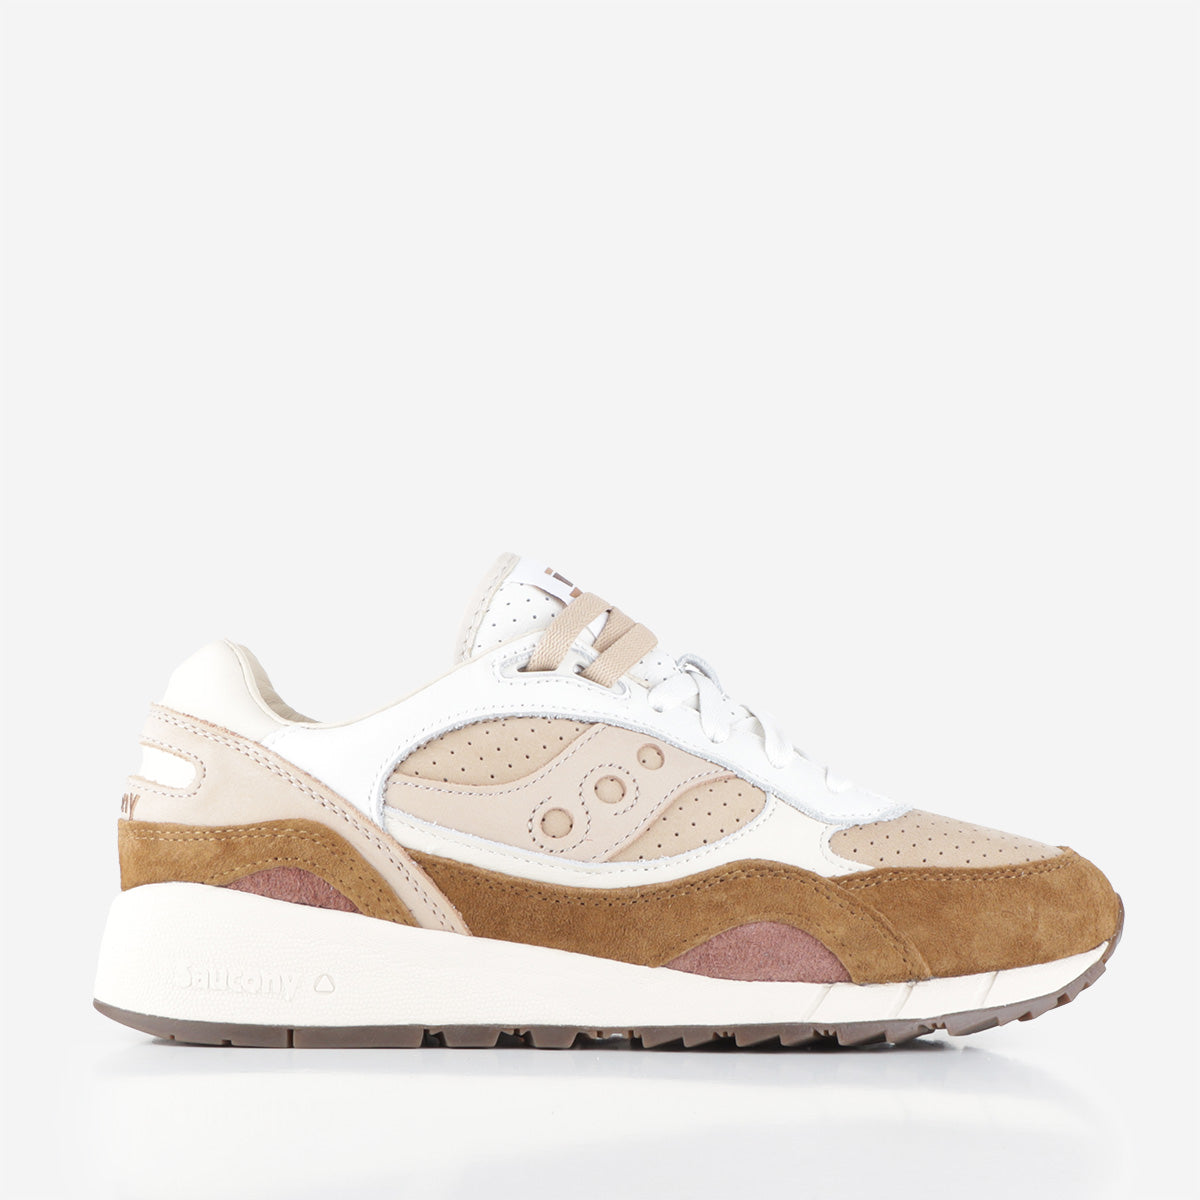 Saucony Shadow 6000 Shoes